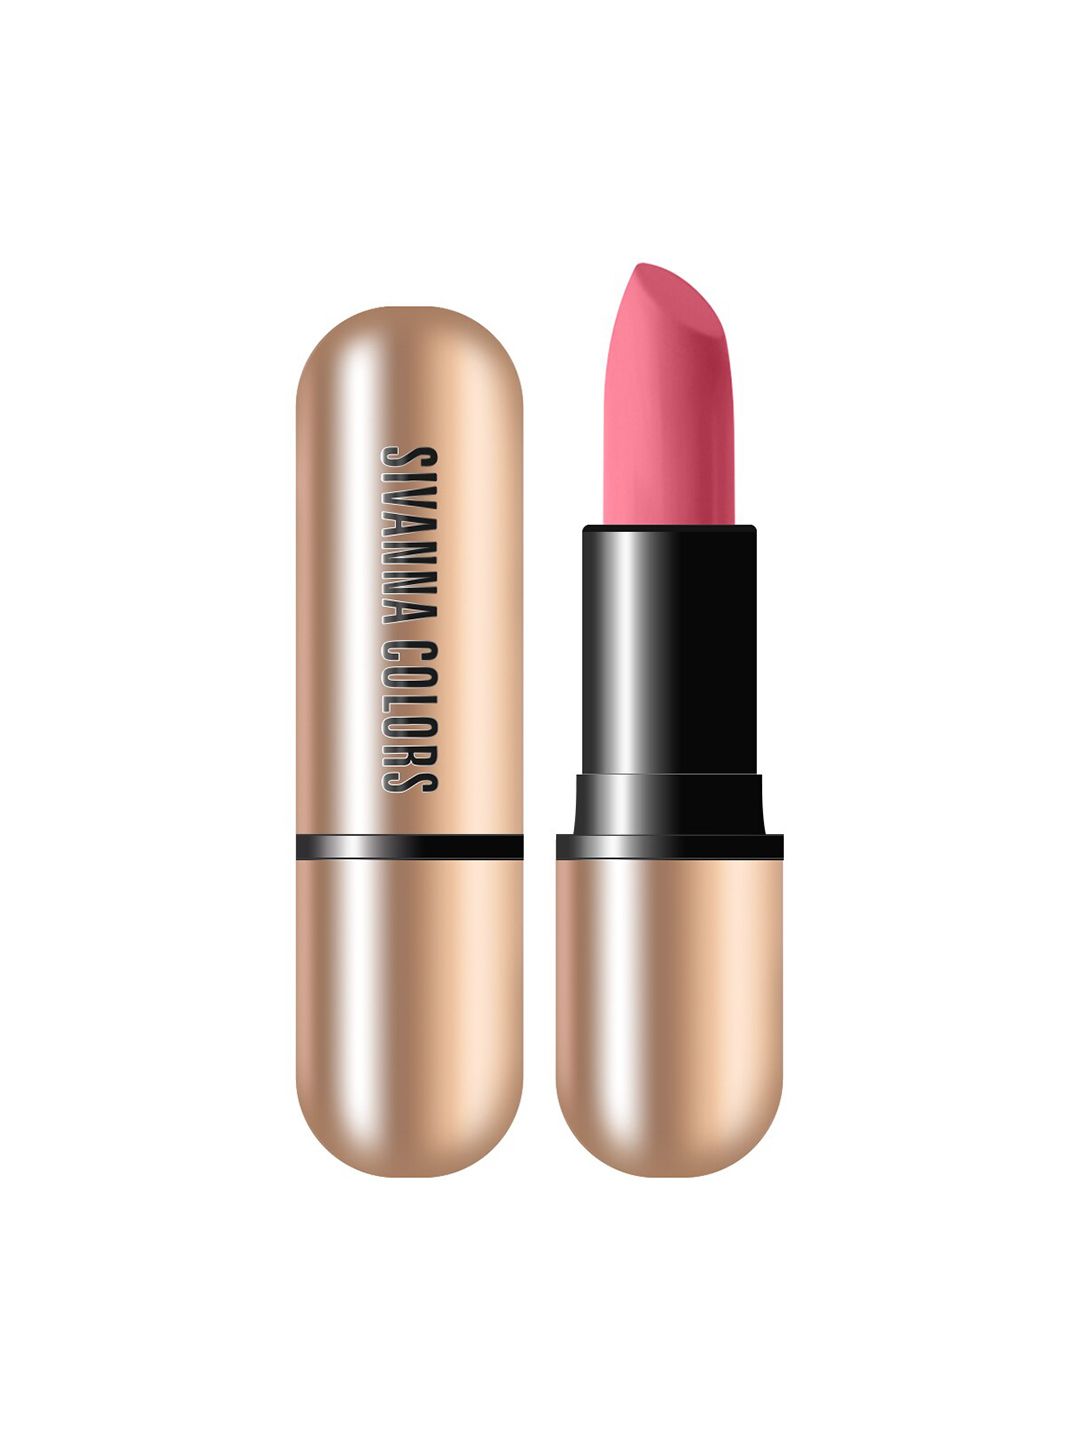 Sivanna Colors Matte Stay Lipstick Kiss Me - HF688 03 Price in India